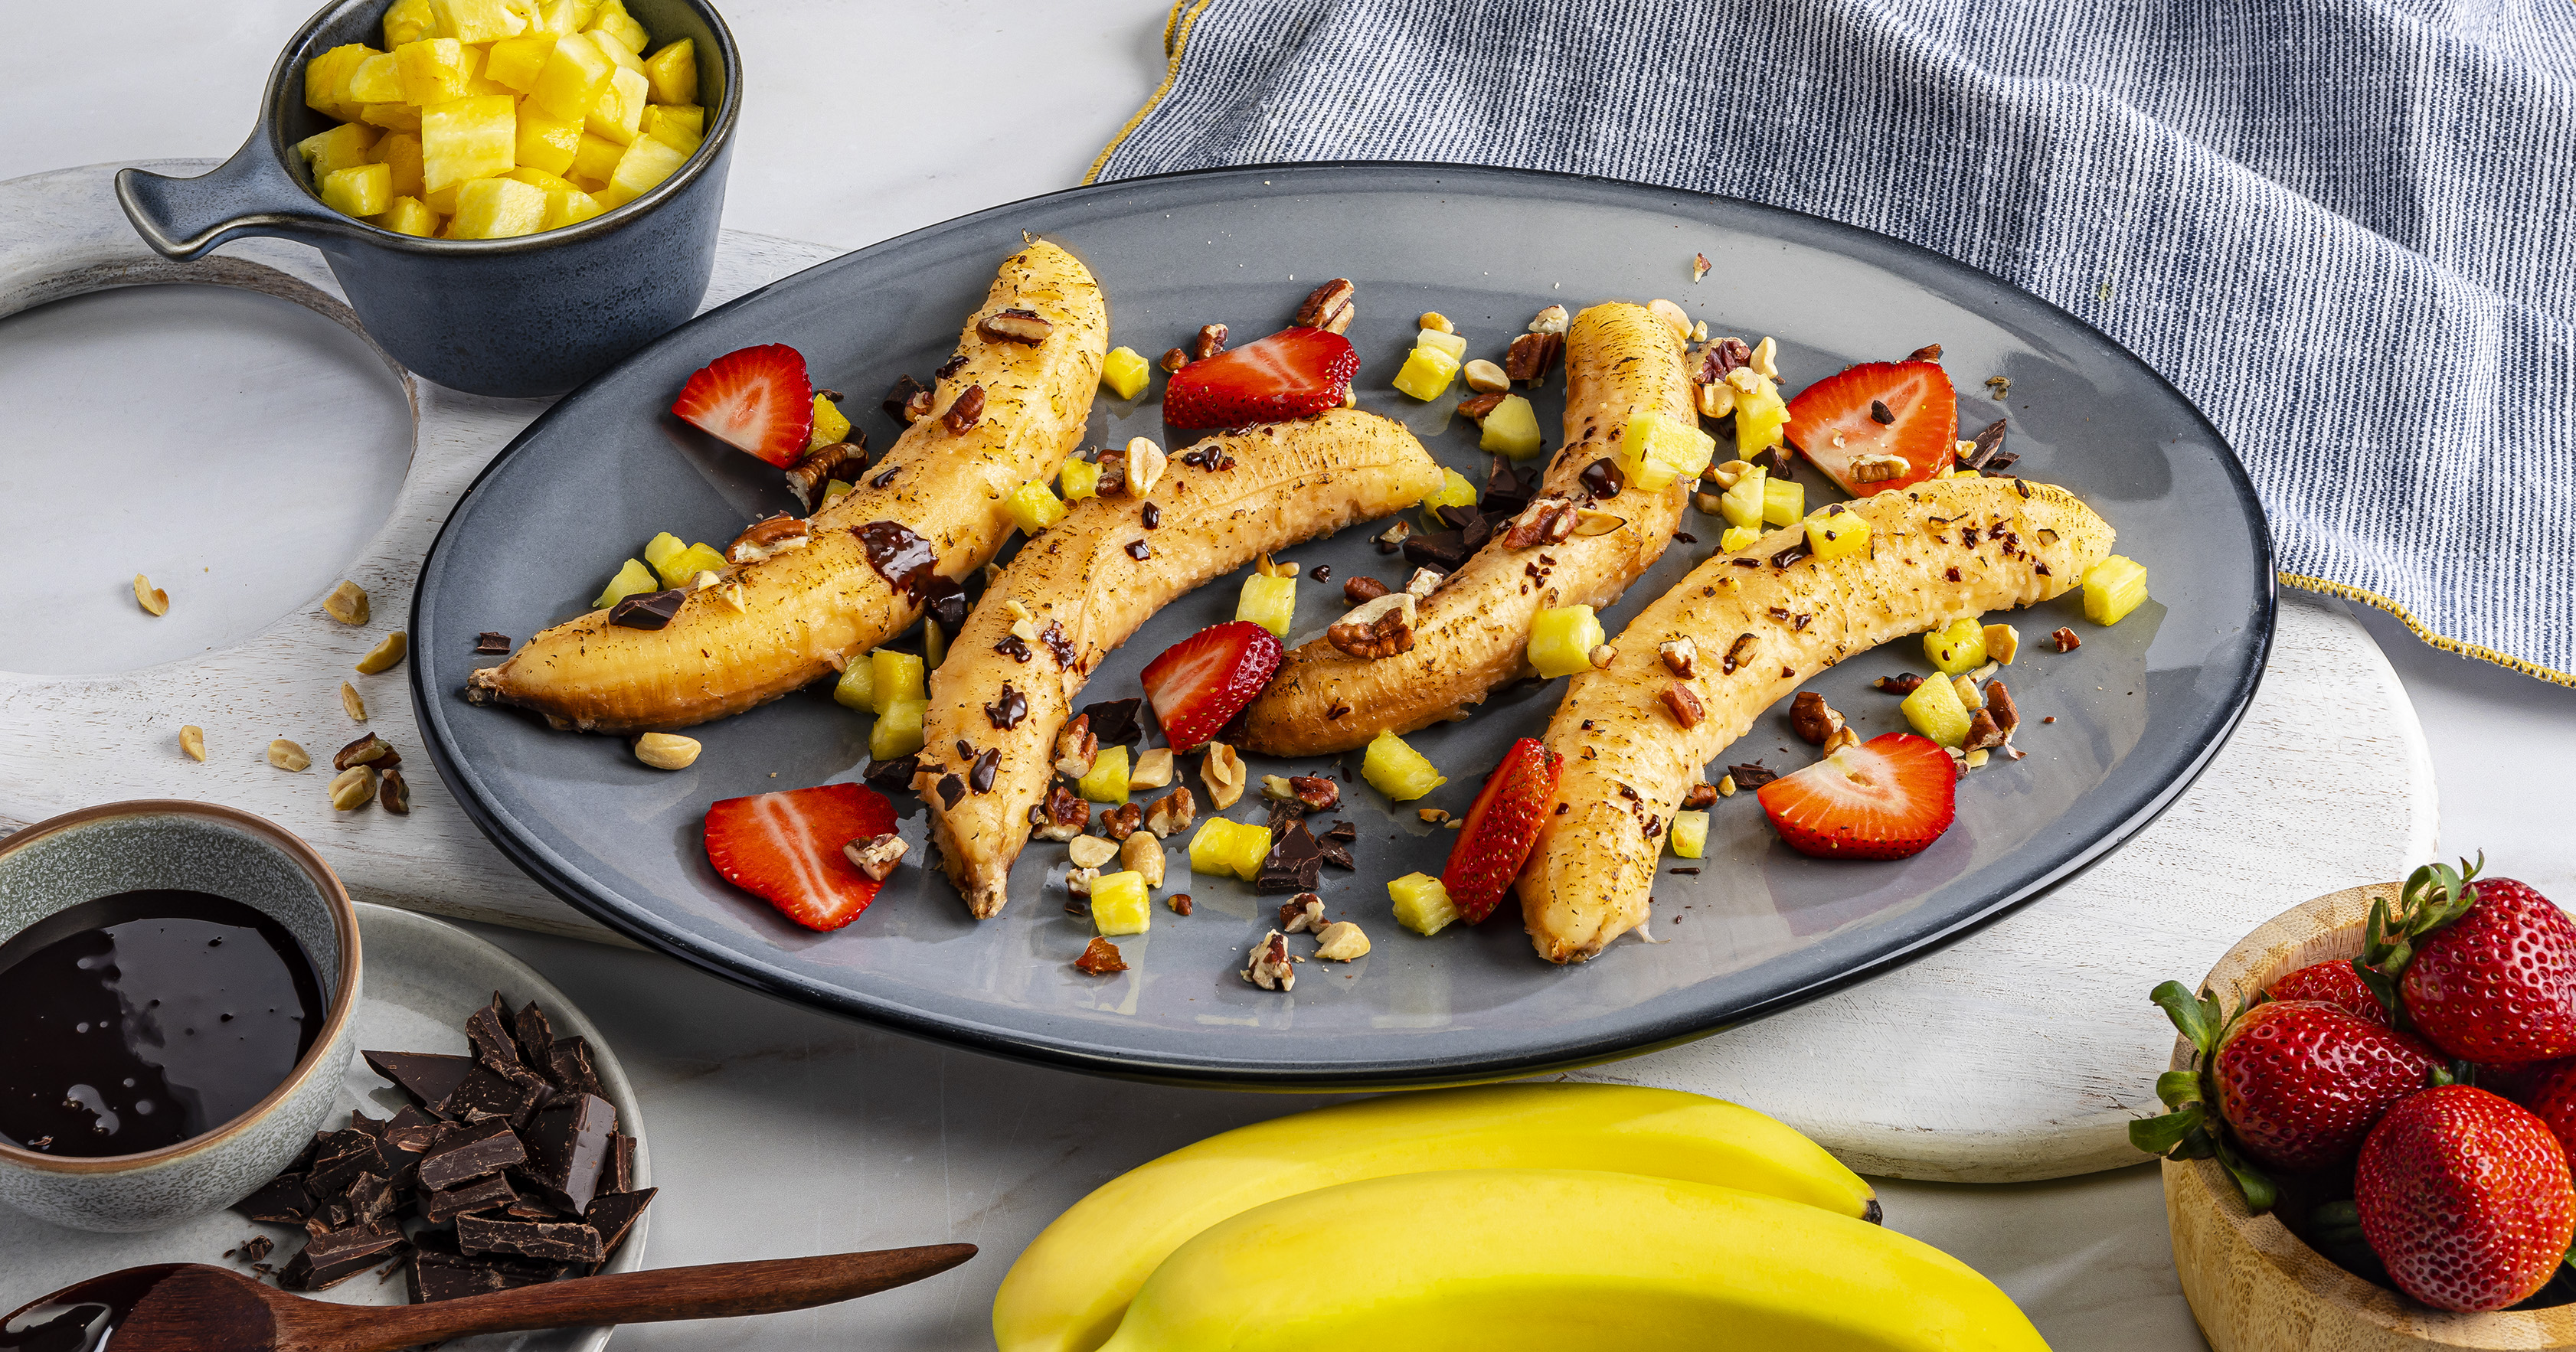 DOLE Grilled Bananas